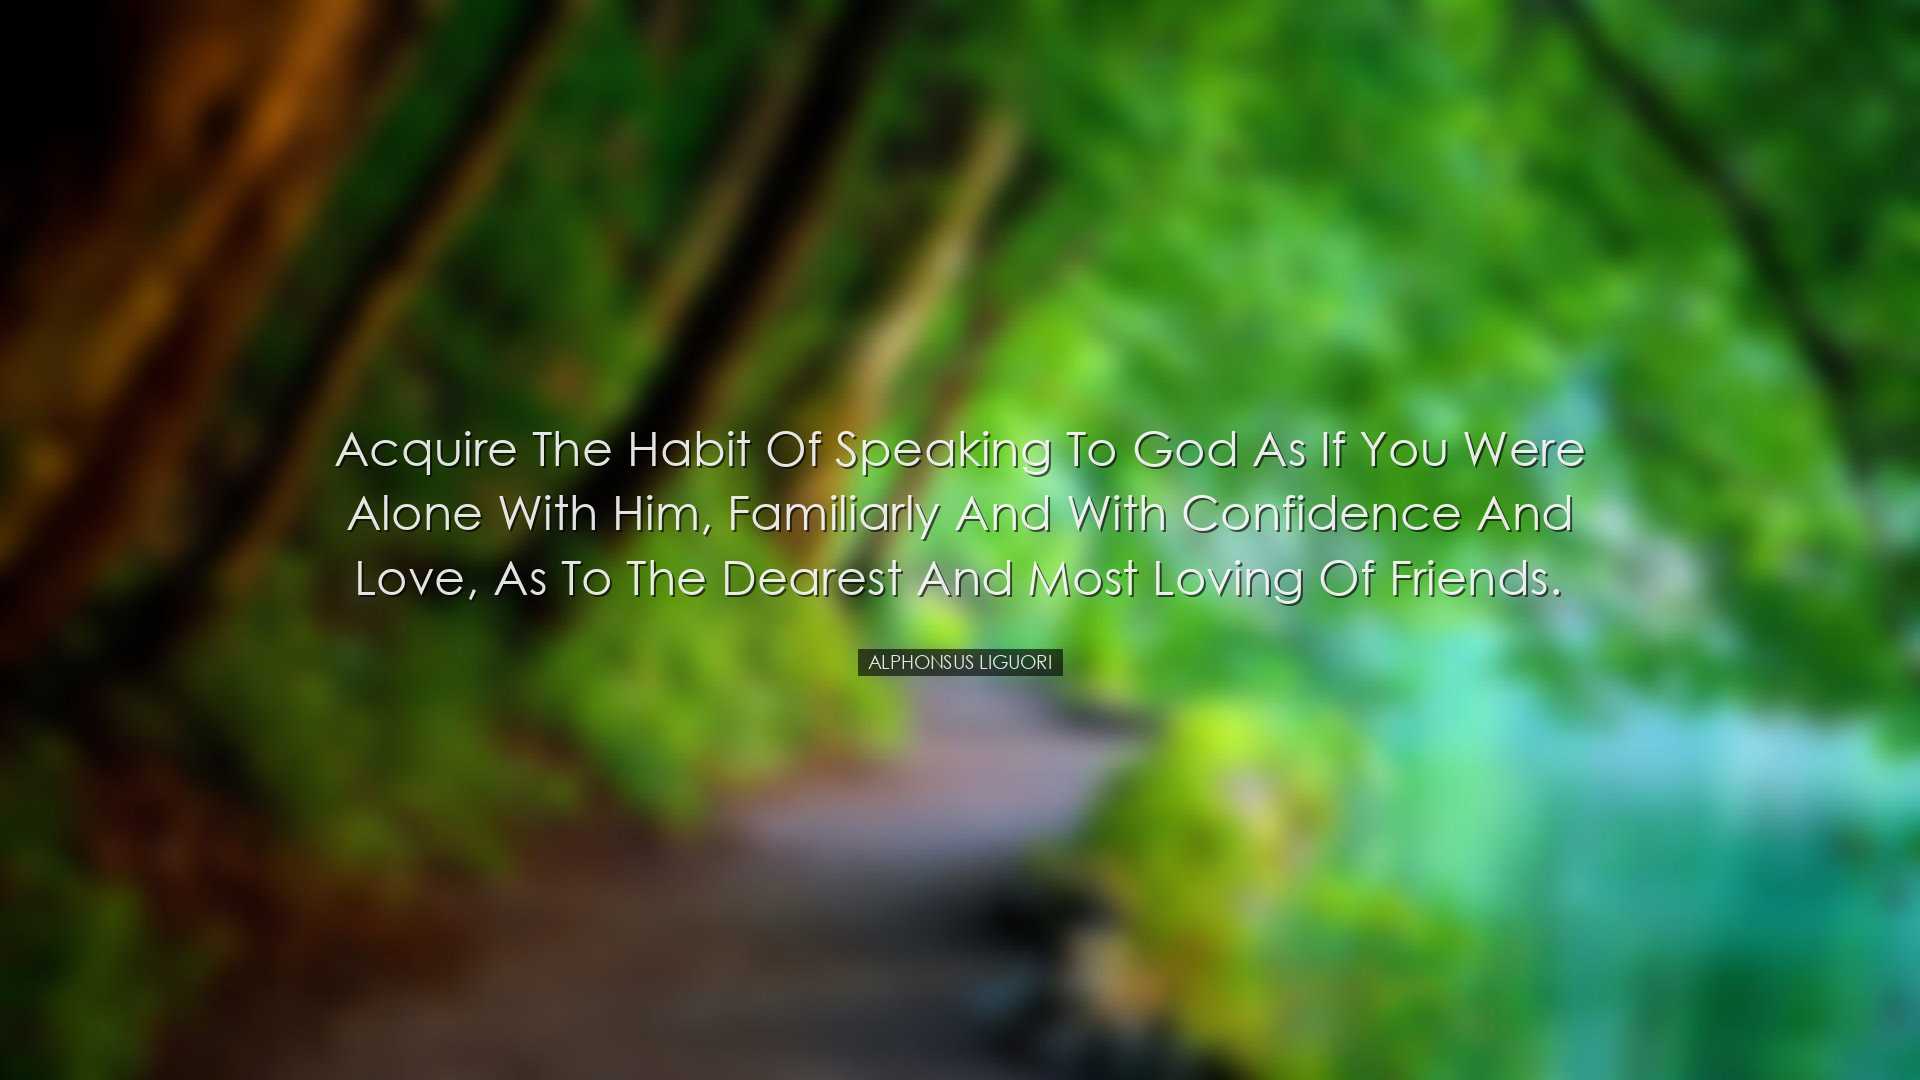 Acquire the habit of speaking to God as if you were alone with Him